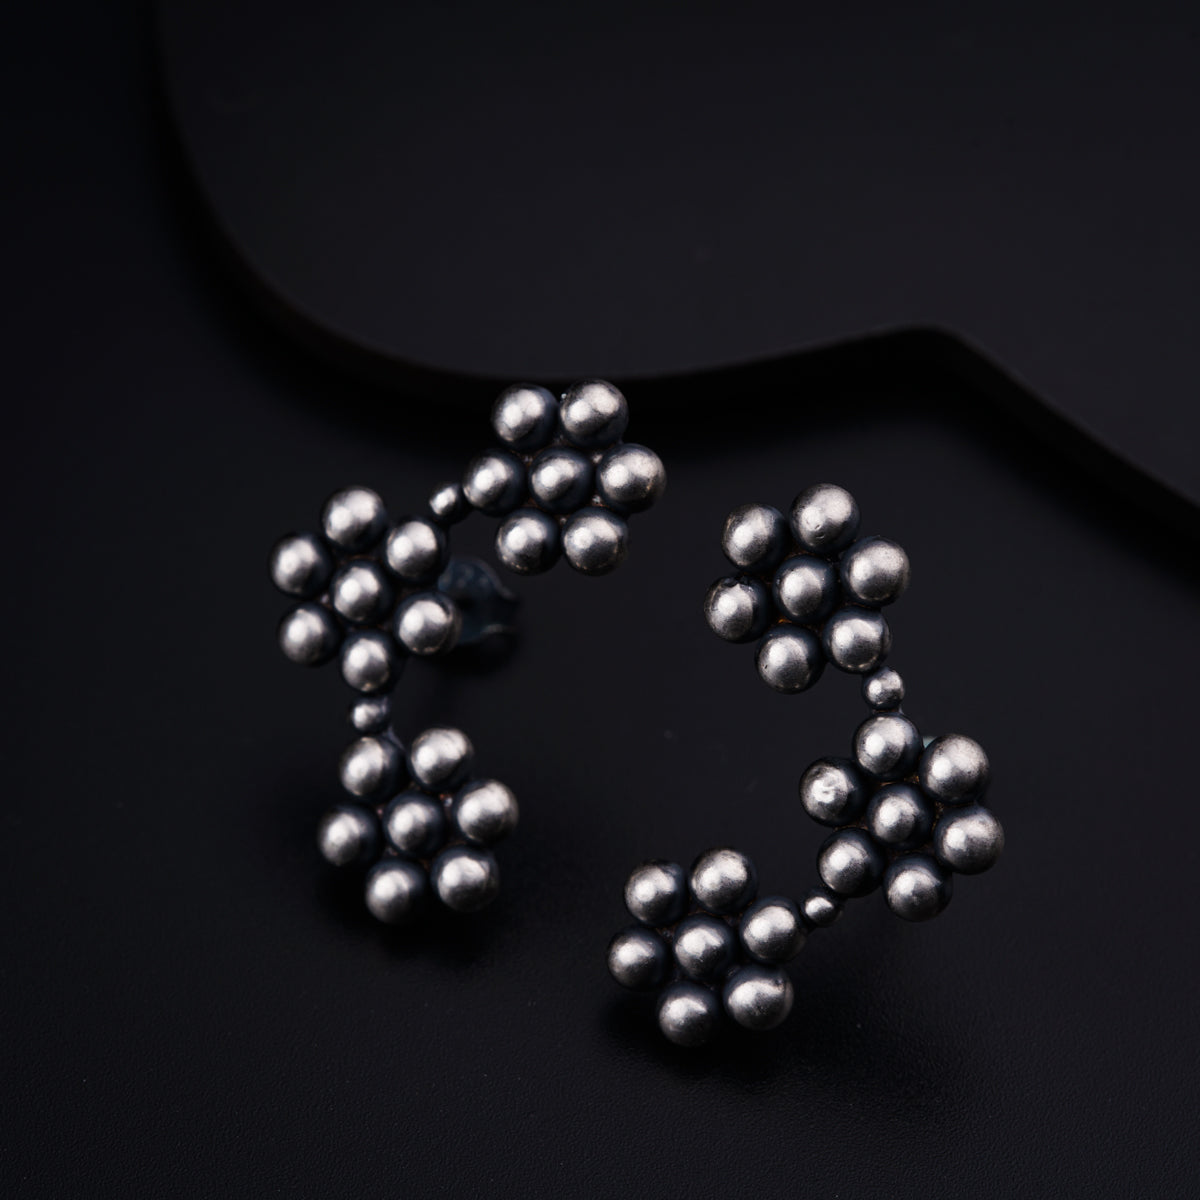 a pair of silver balls sitting on top of a black surface